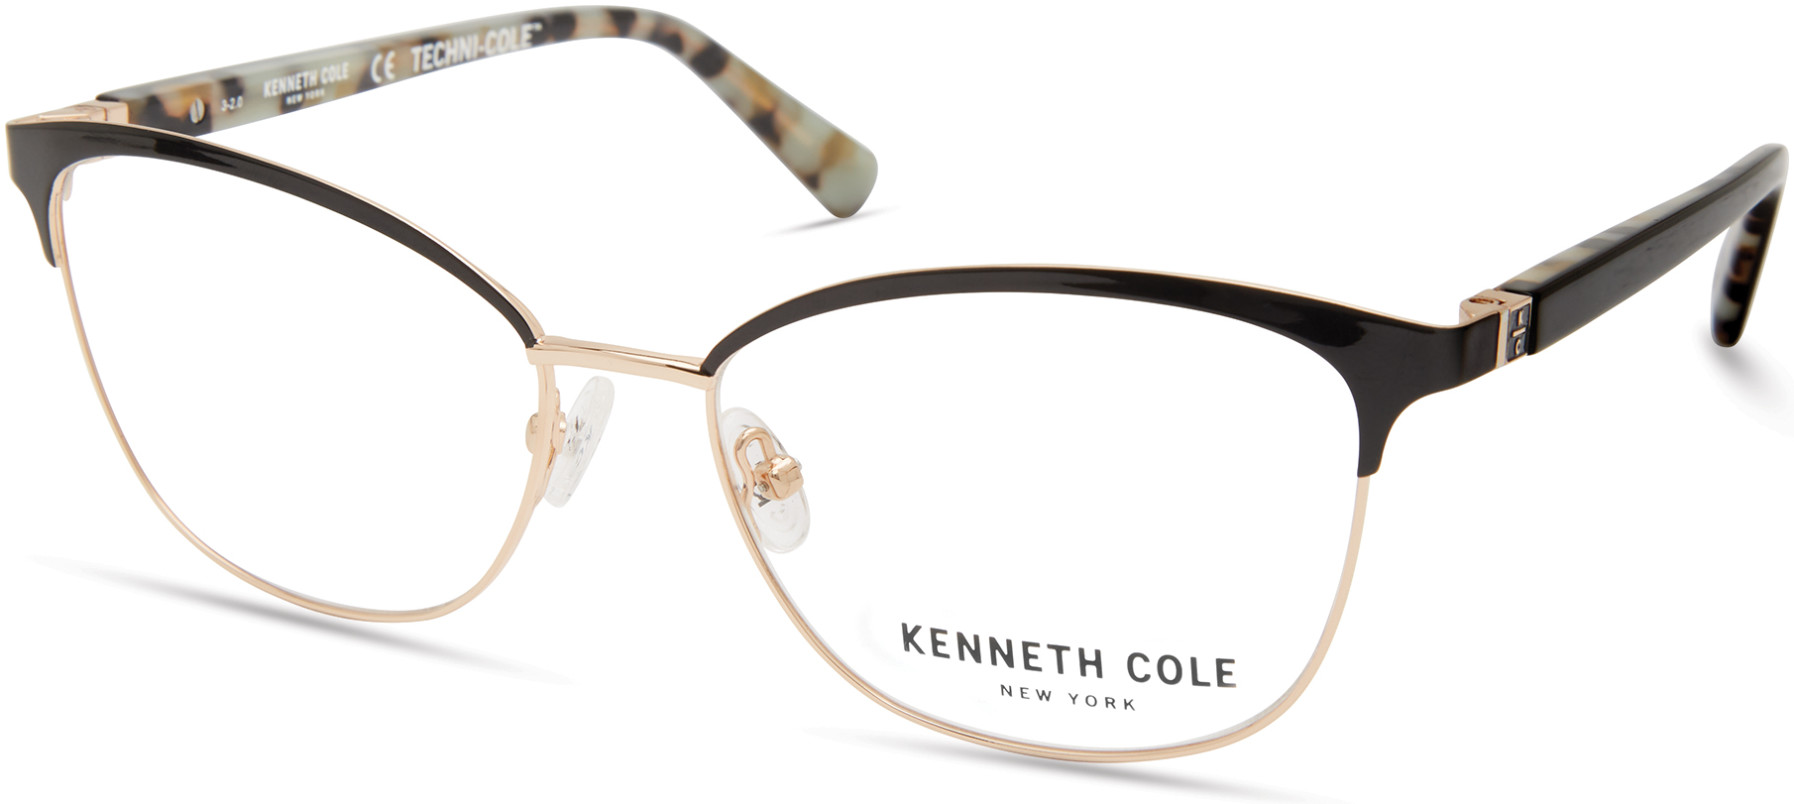 KENNETH COLE NY 0329